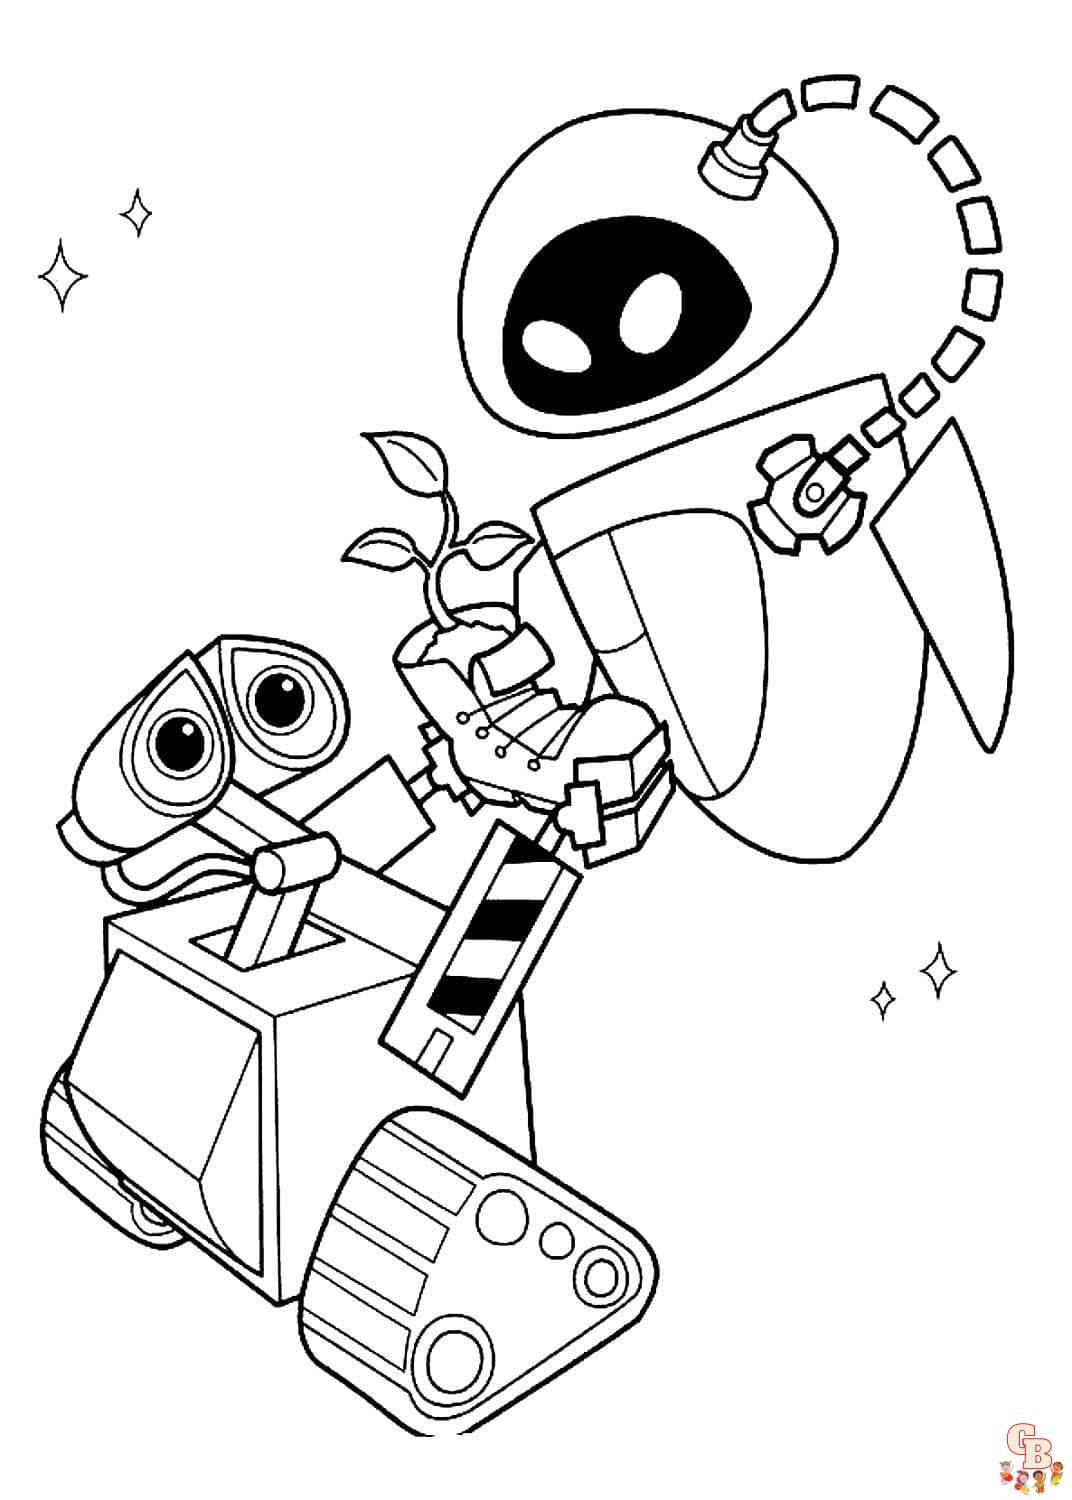 Free Wall E coloring pages for kids